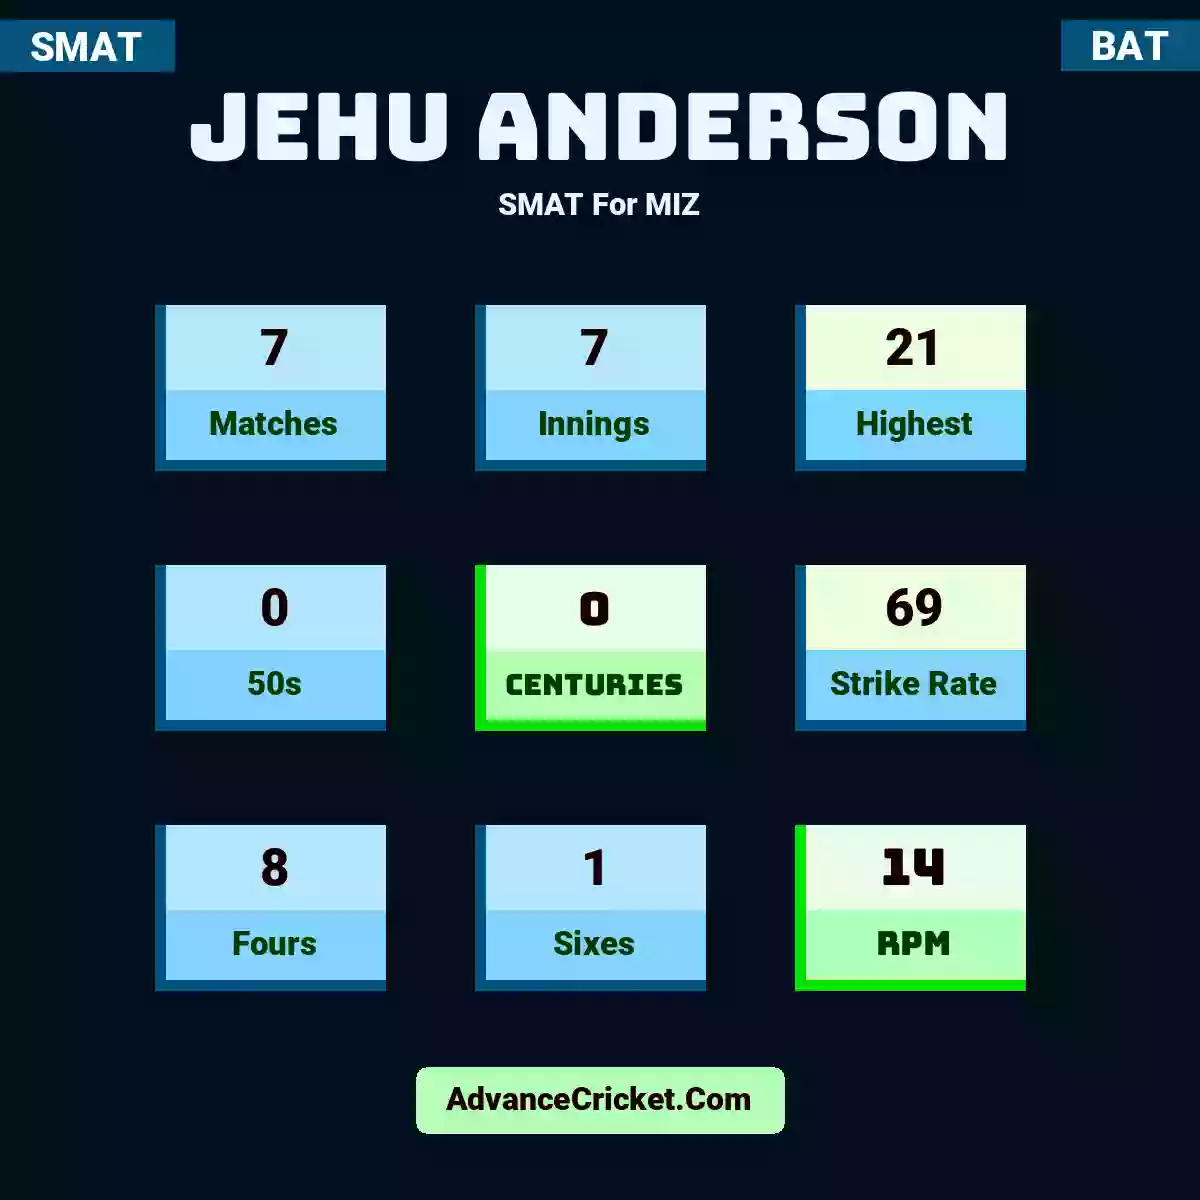 Jehu Anderson SMAT  For MIZ, Jehu Anderson played 7 matches, scored 21 runs as highest, 0 half-centuries, and 0 centuries, with a strike rate of 69. J.Anderson hit 8 fours and 1 sixes, with an RPM of 14.